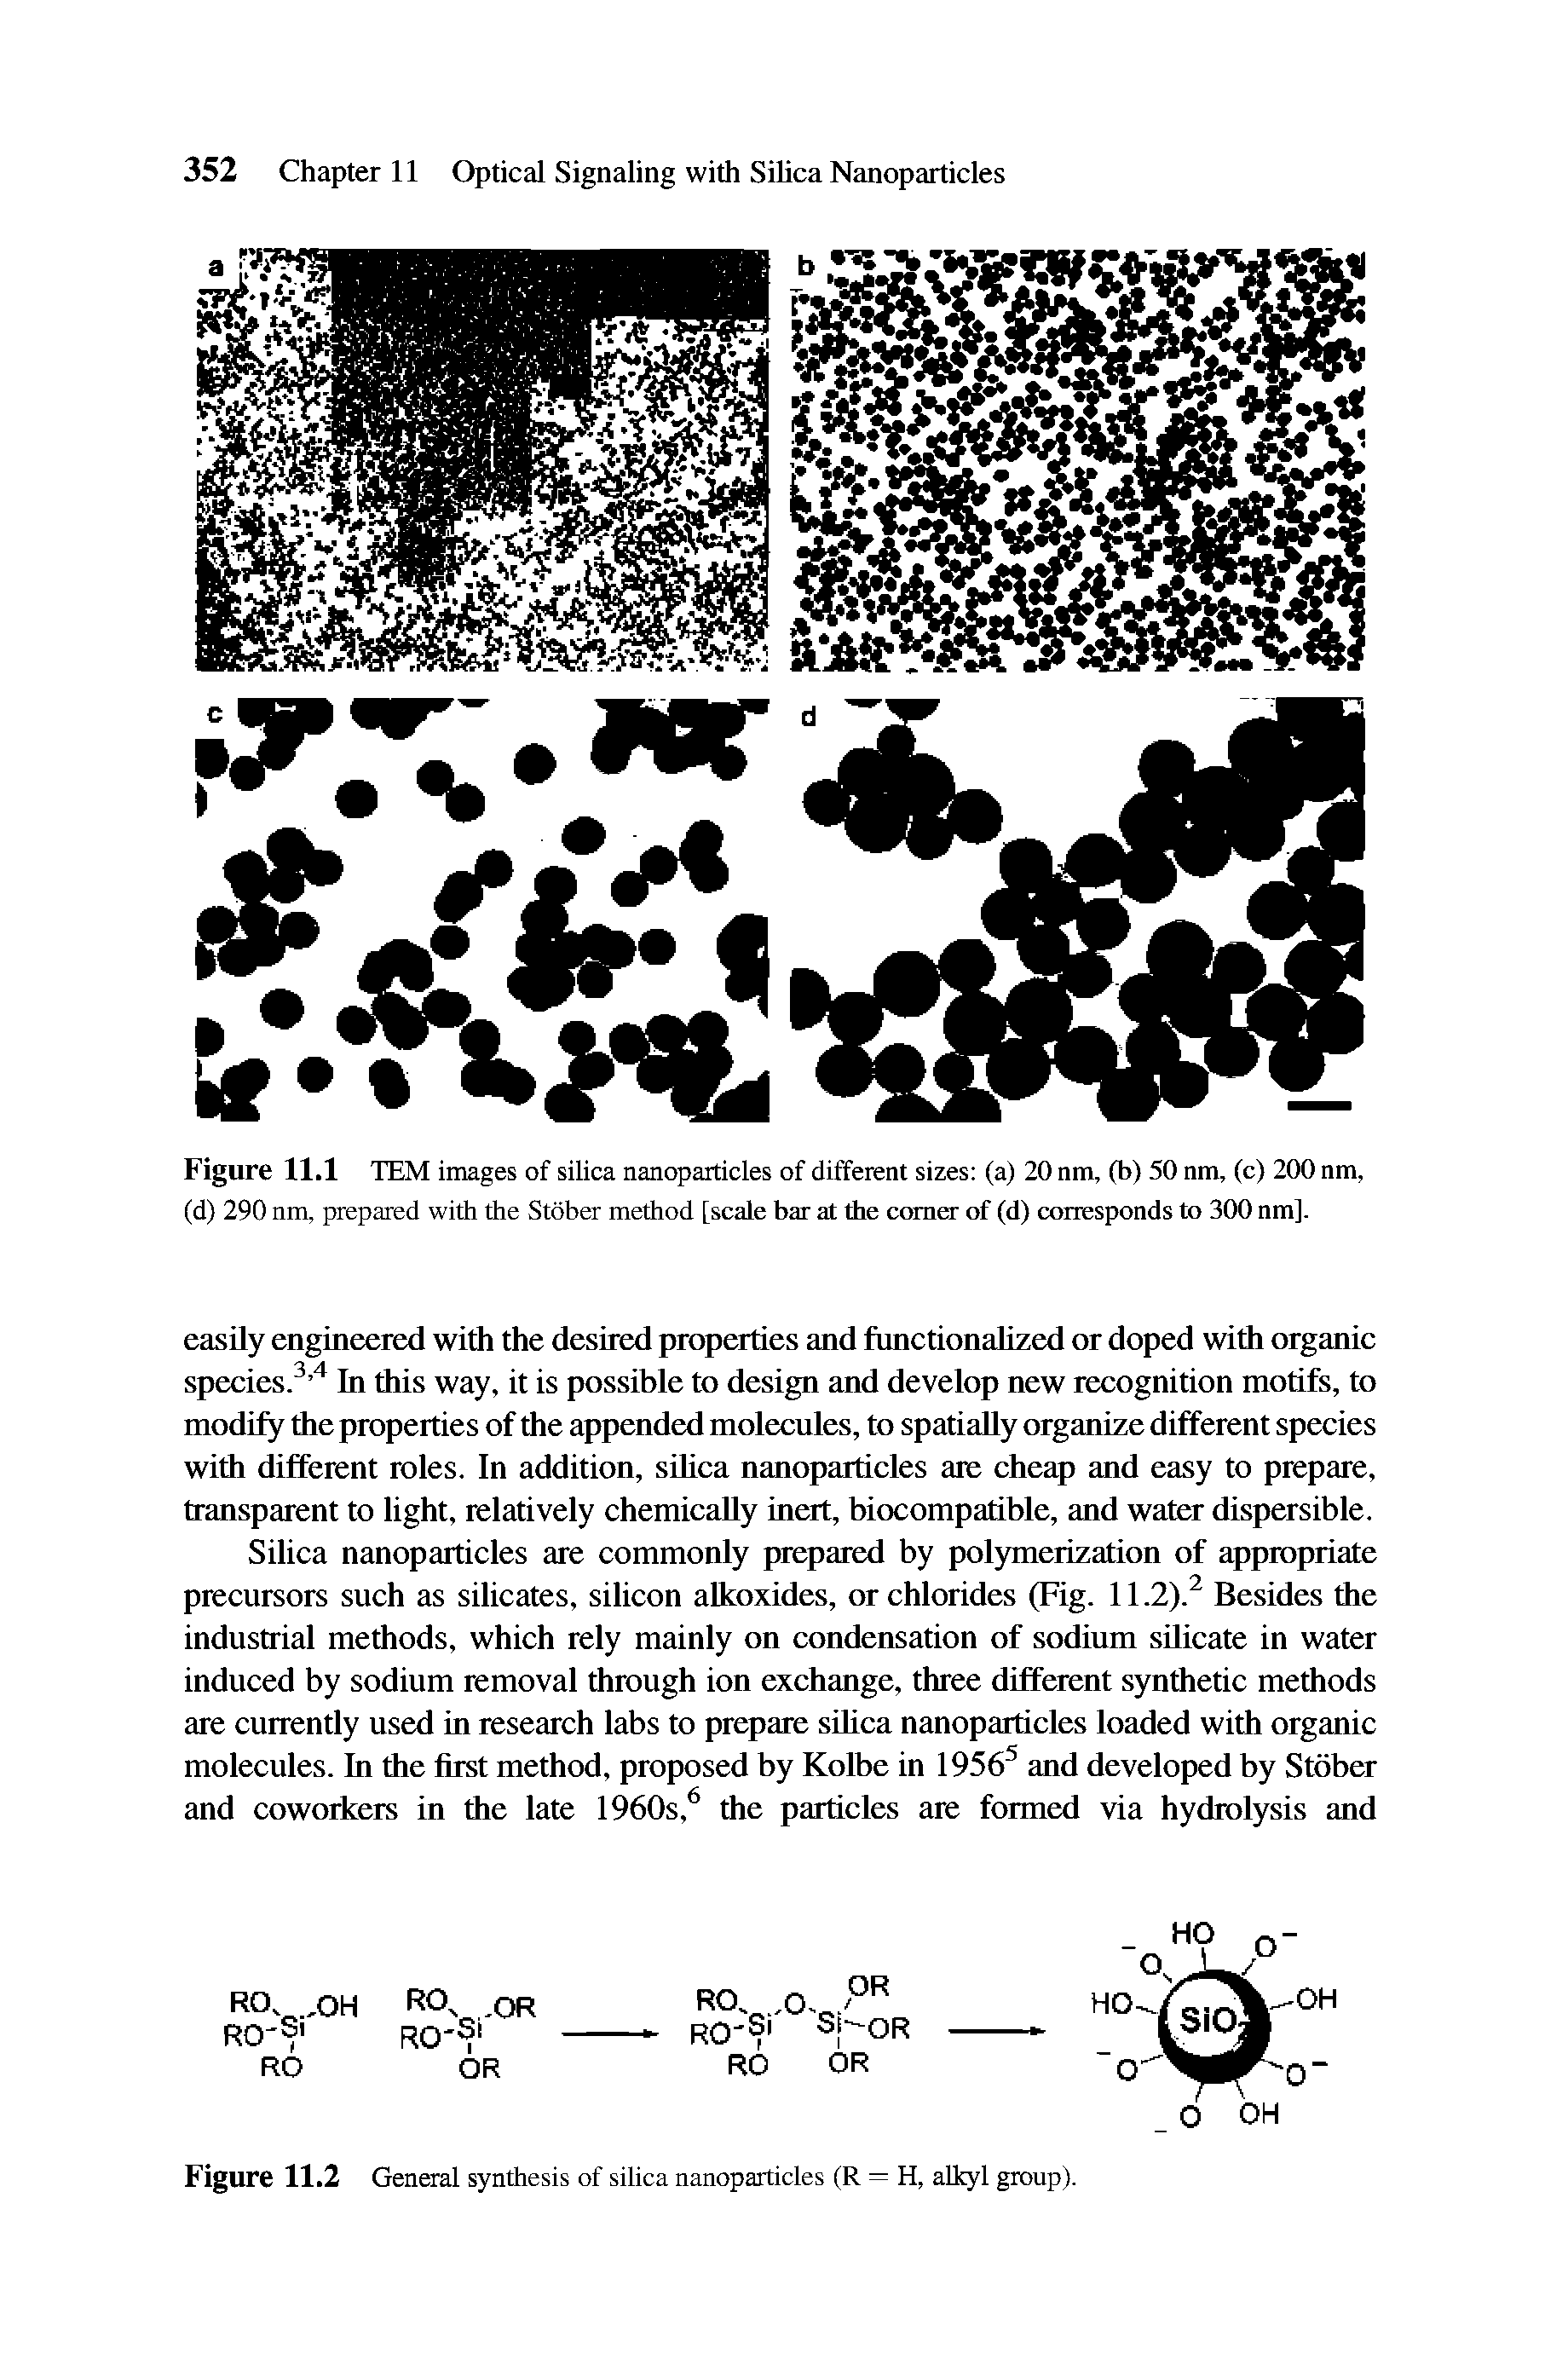 Figure 11.1 TEM images of silica nanoparticles of different sizes (a) 20 nm, (b) 50 nm, (c) 200 nm, (d) 290 nm, prepared with the Stober method [scale bar at the comer of (d) corresponds to 300 nm].